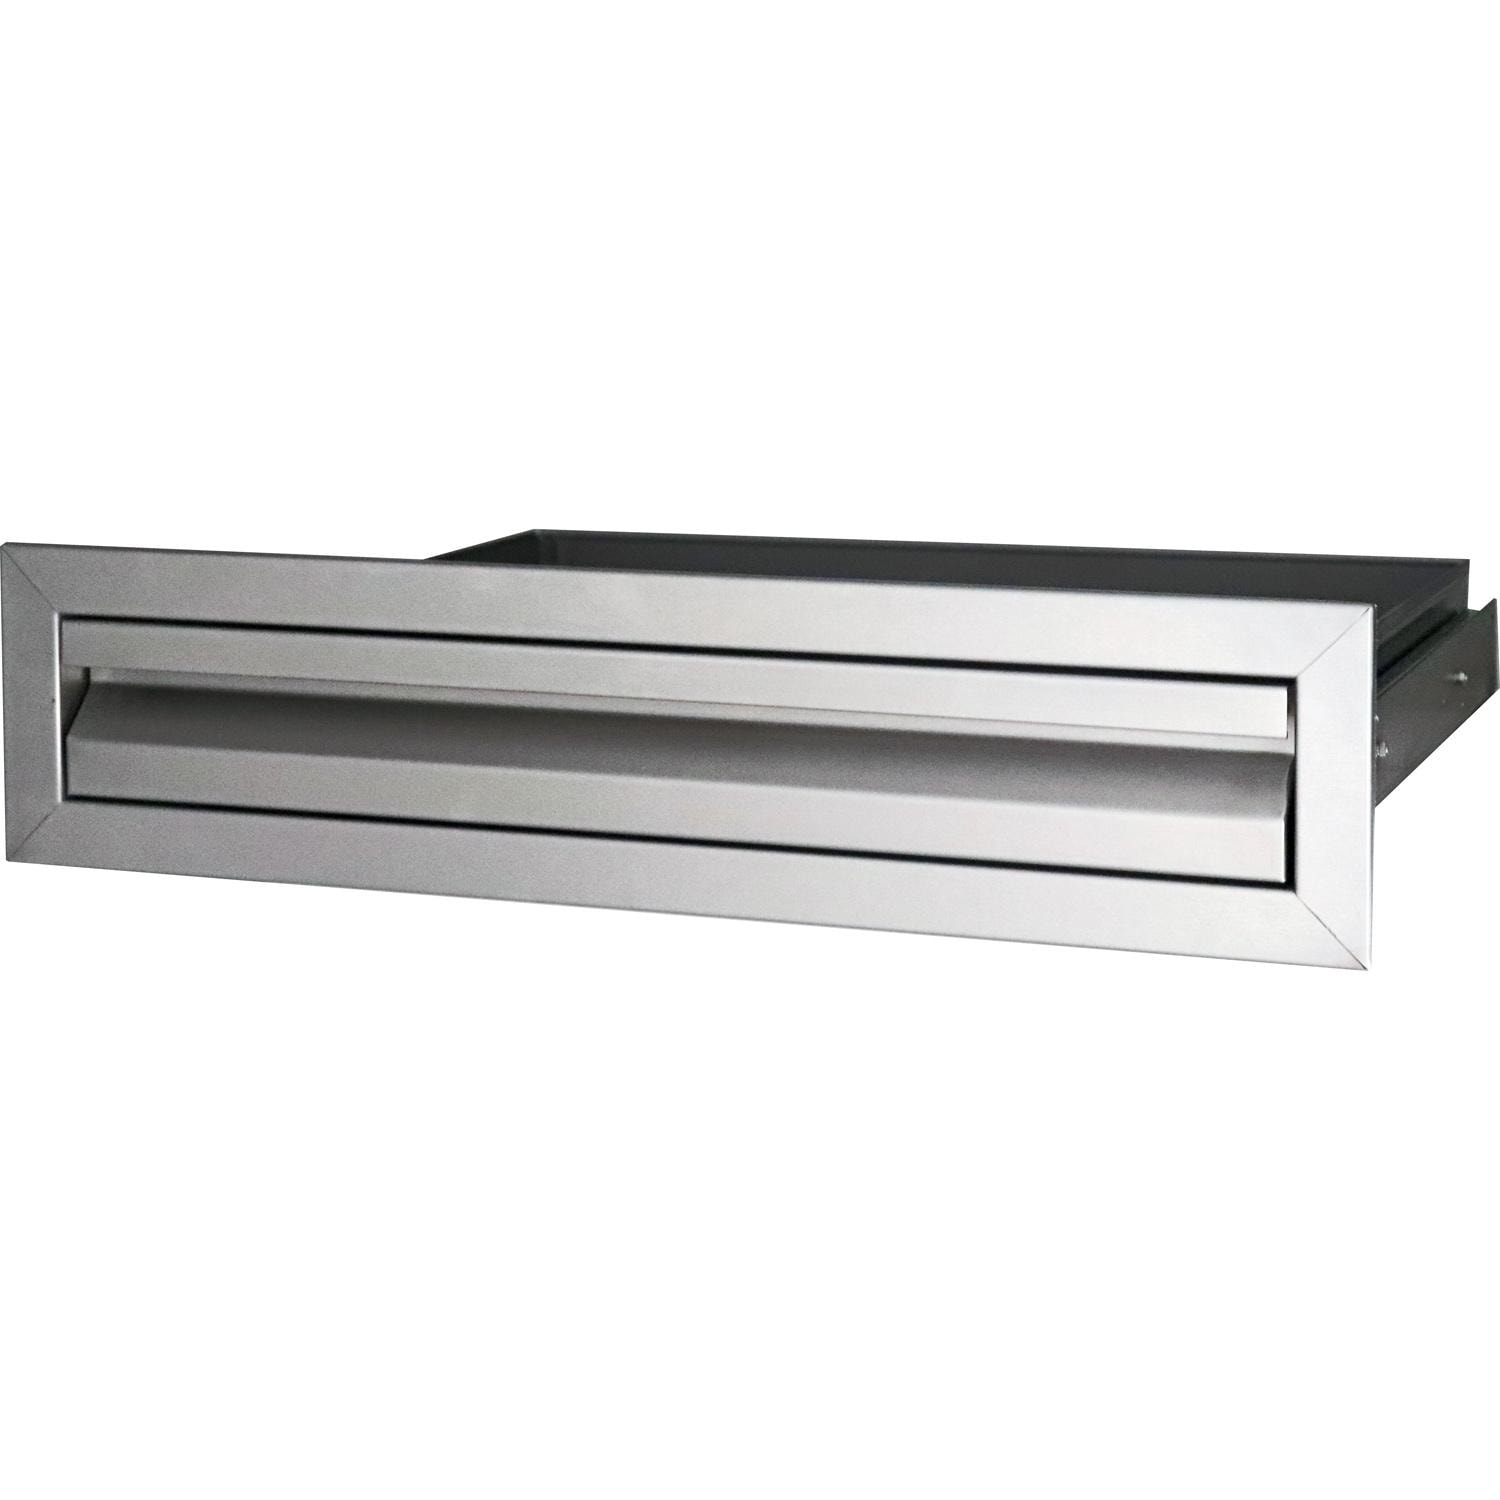 RCS Valiant Series 25 X 6-Inch Stainless Steel Single Access Drawer - VDU1 - image 1 of 2